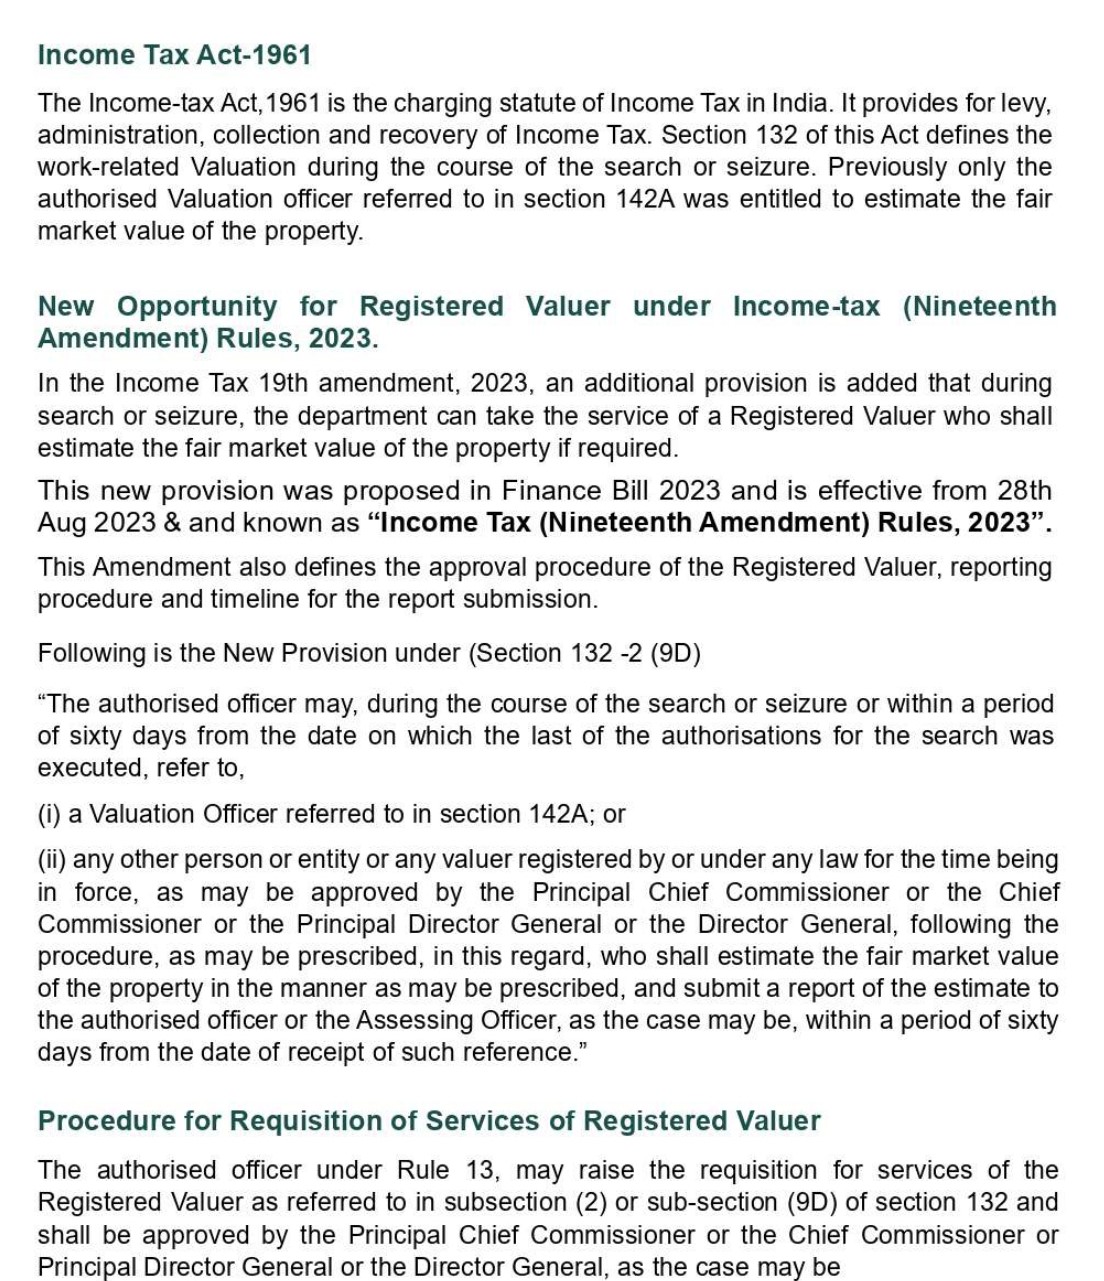 NEW OPPORTUNITY FOR REGISTERED VALUERS UNDER THE INCOME TAX ACT 1961’ -1